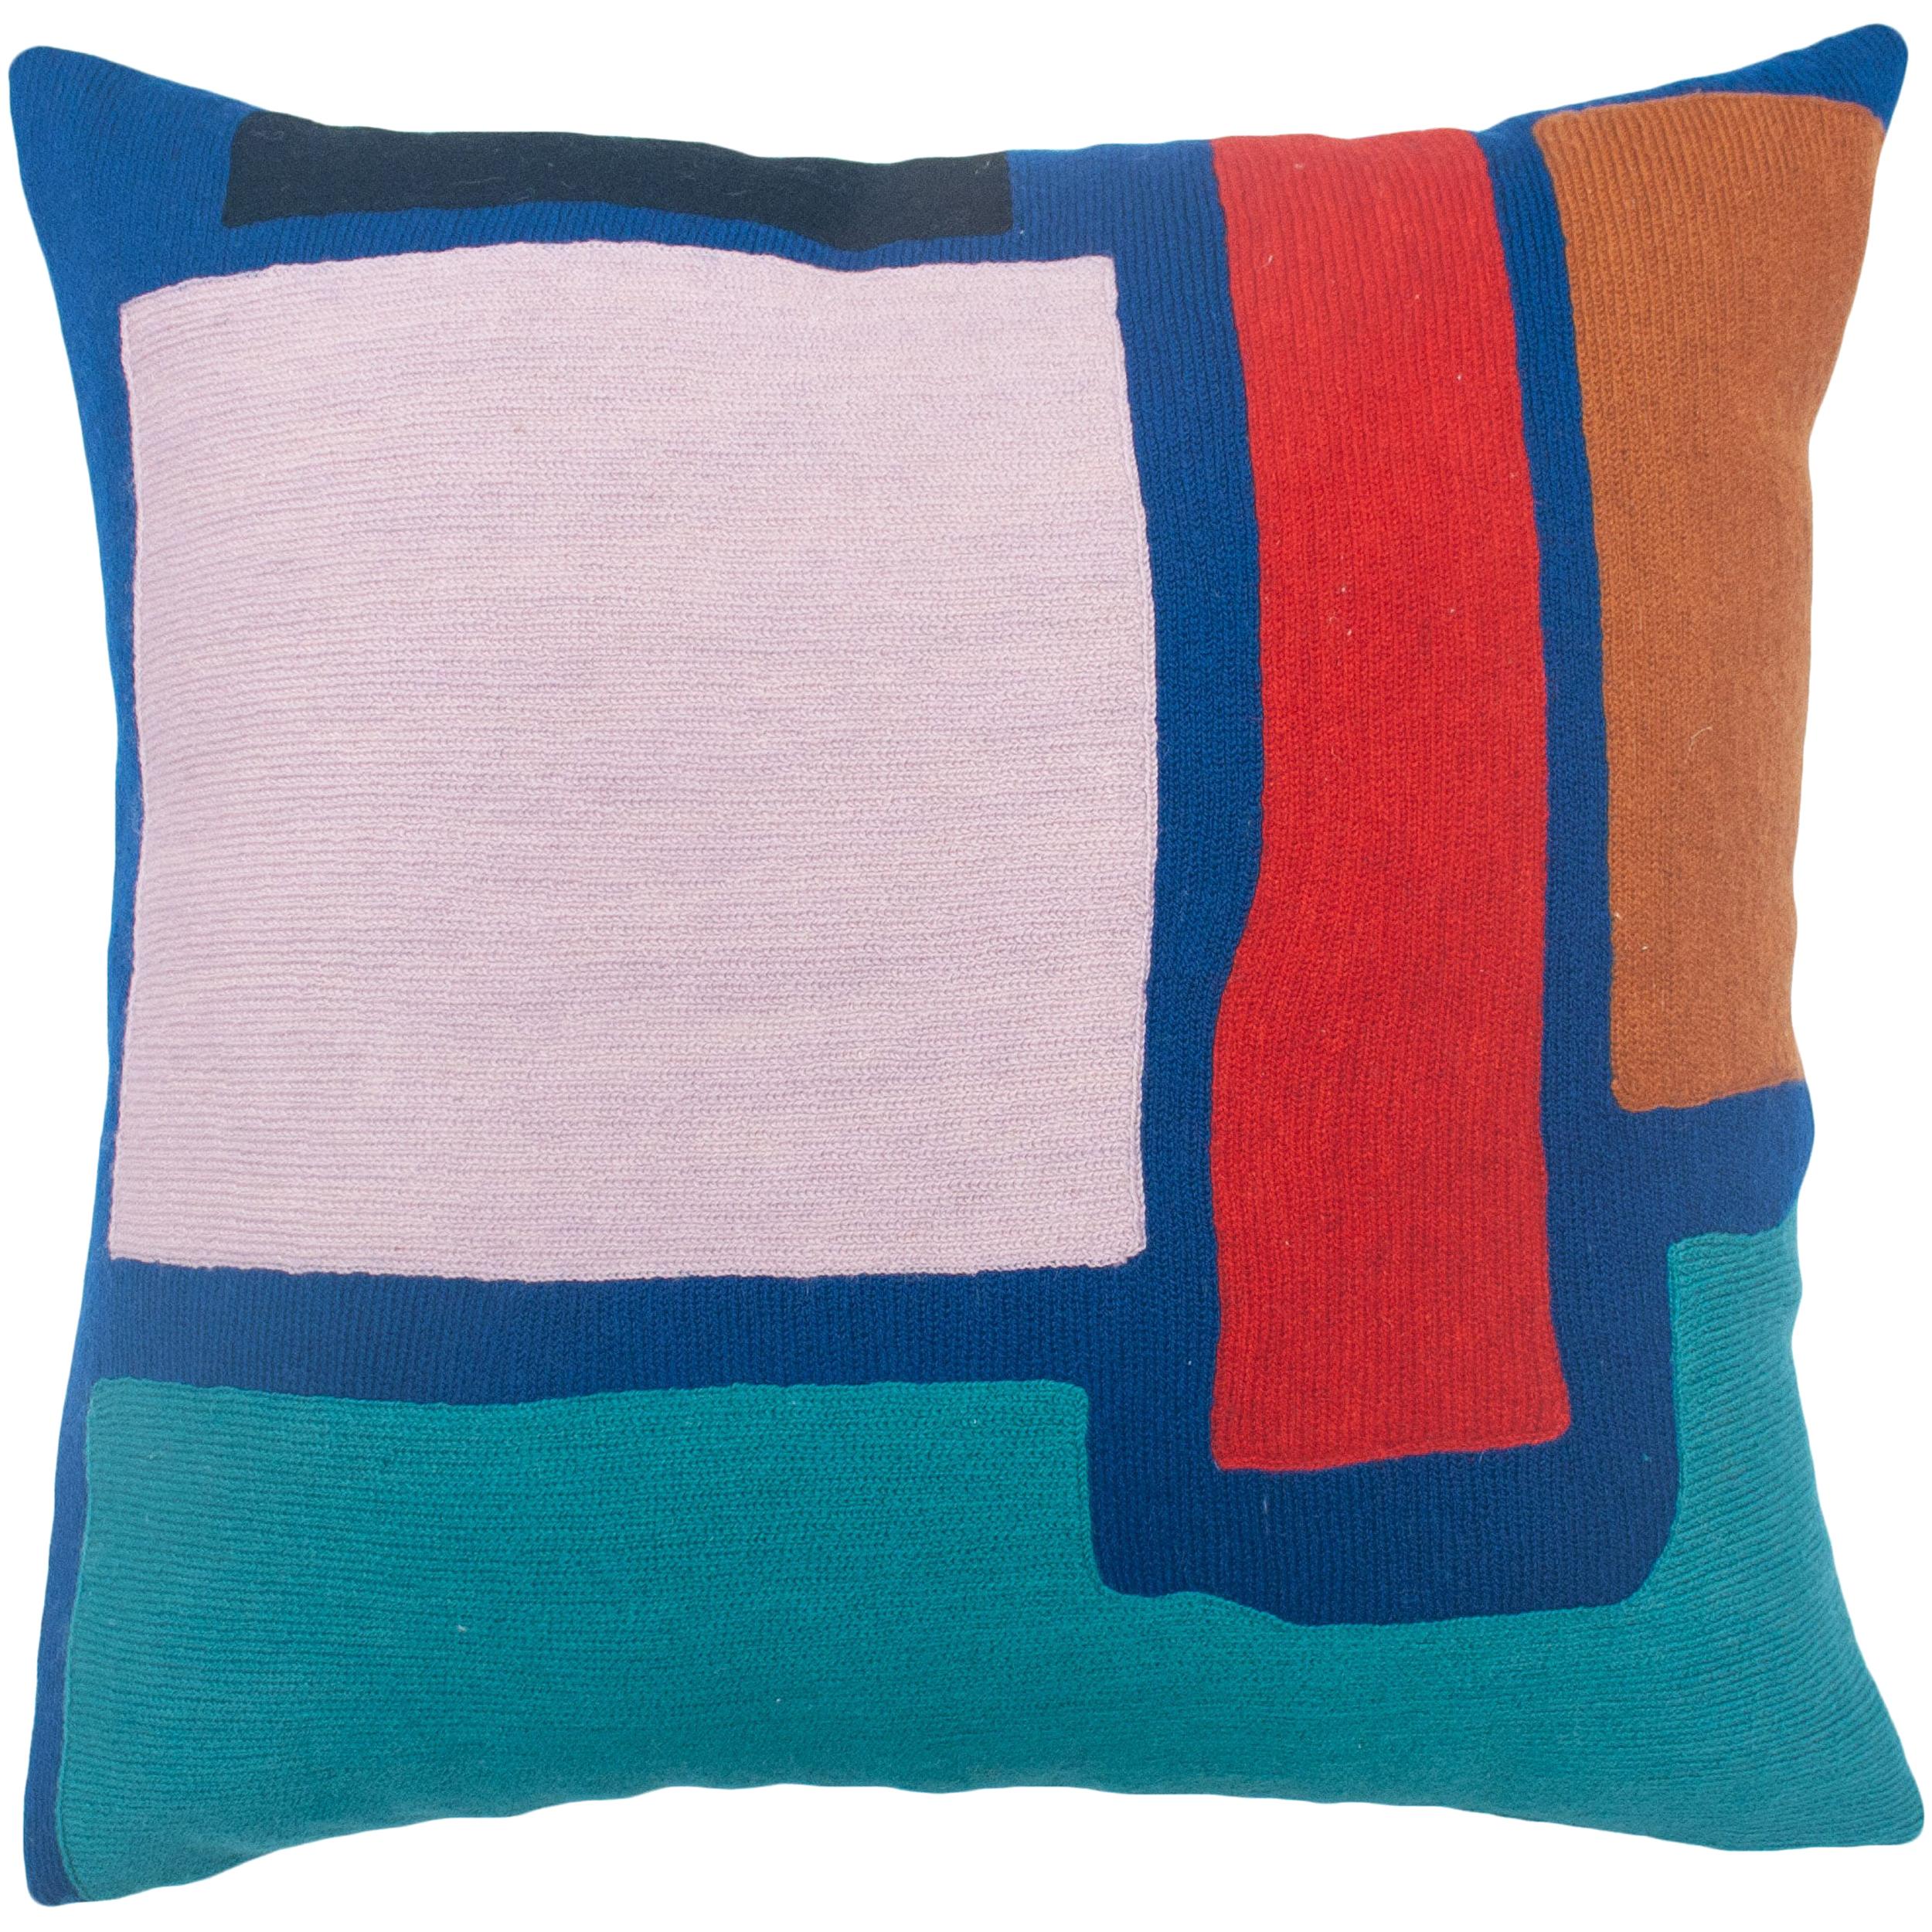 Blah Blah Square Hand Embroidered Modern Geometric Throw Pillow Cover